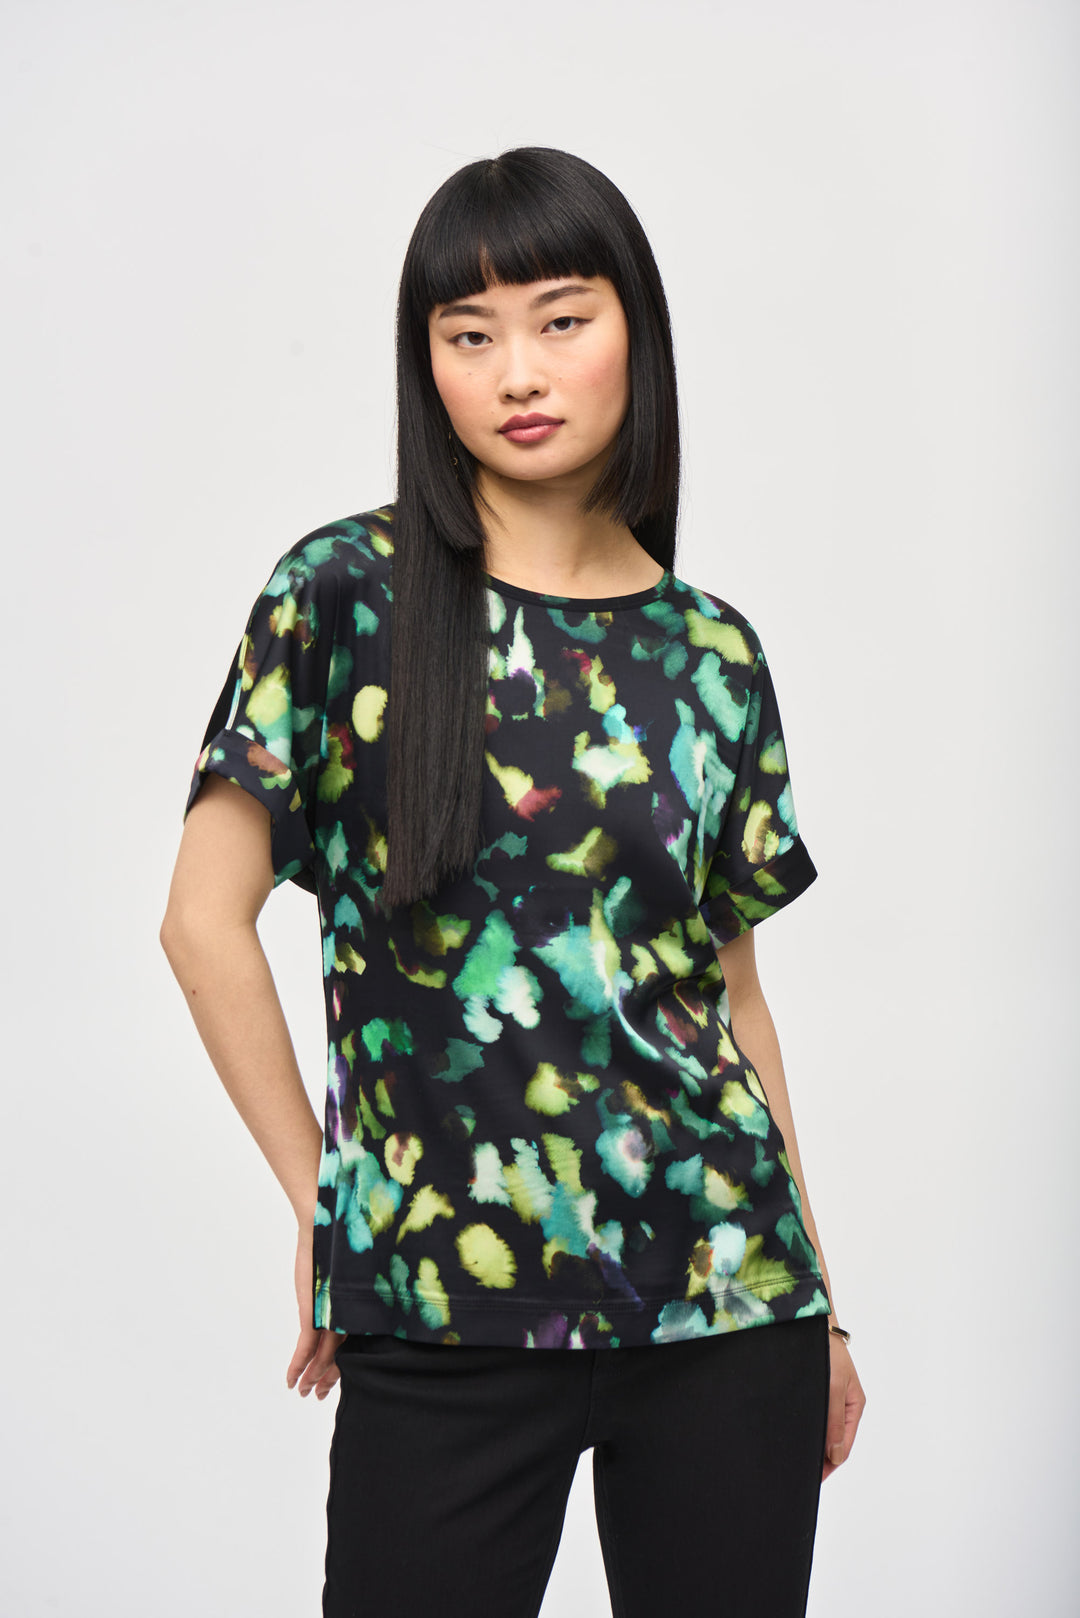 Joseph Ribkoff Fall 2024 Featuring a vivid design pattern in the front, light and soft fabric and contrast cuffs and neckline, this fall top is perfect for a fun and laid-back look.